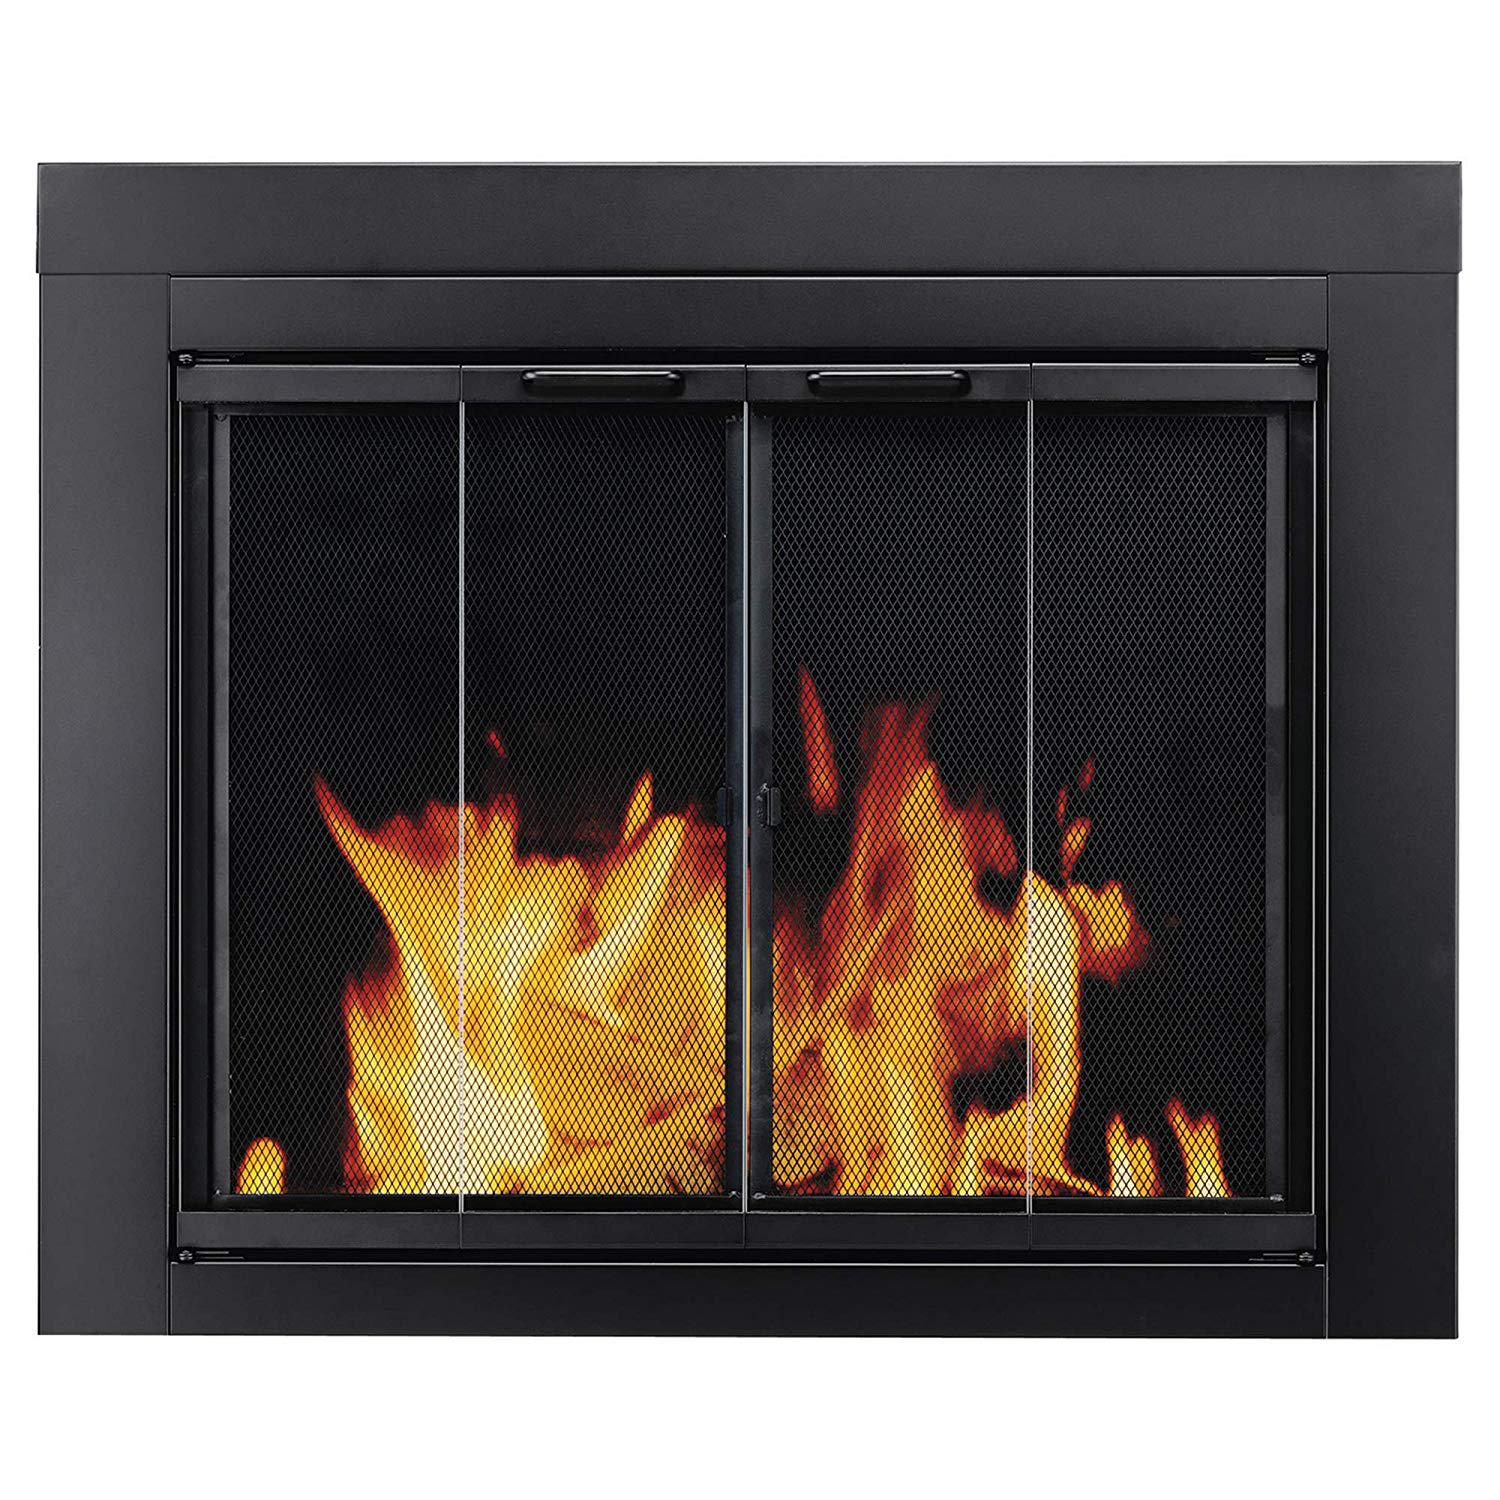 Floating Entertainment Center with Fireplace Fresh Pleasant Hearth at 1000 ascot Fireplace Glass Door Black Small